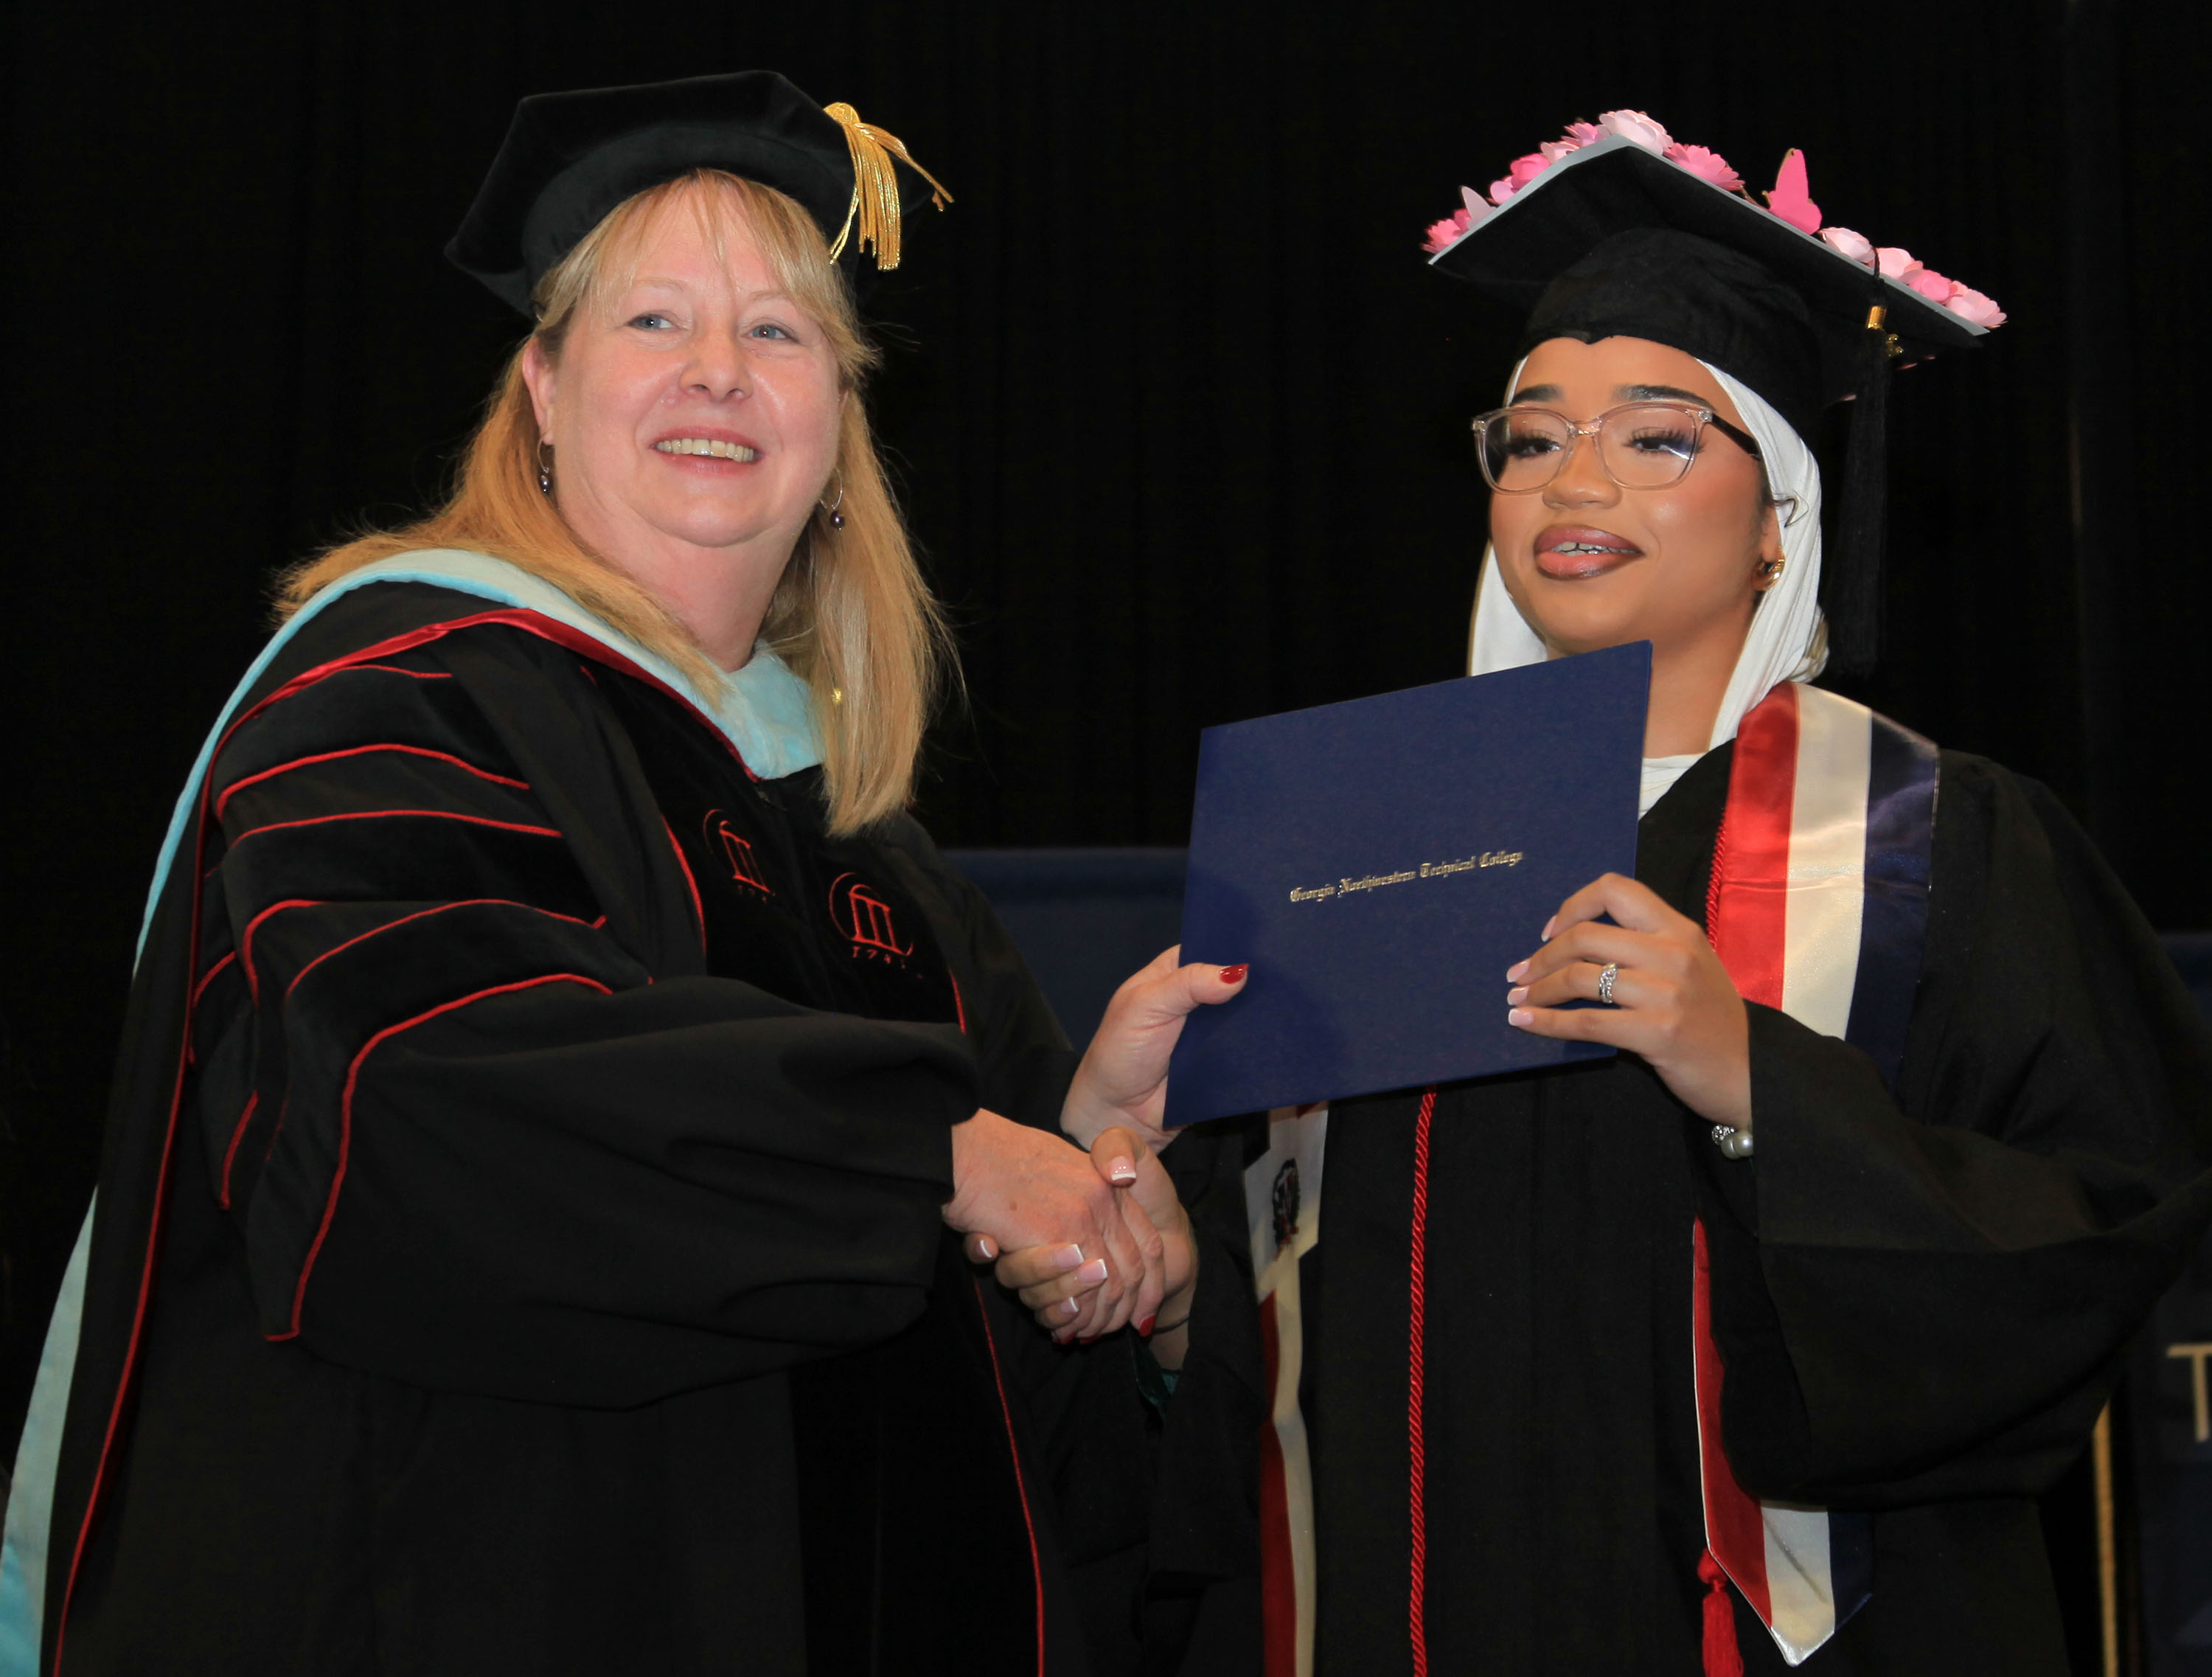 Dr. Heidi Popham, GNTC president (left), presents Luisa Maria Almonte Deleon with her diploma in Medical Assisting.